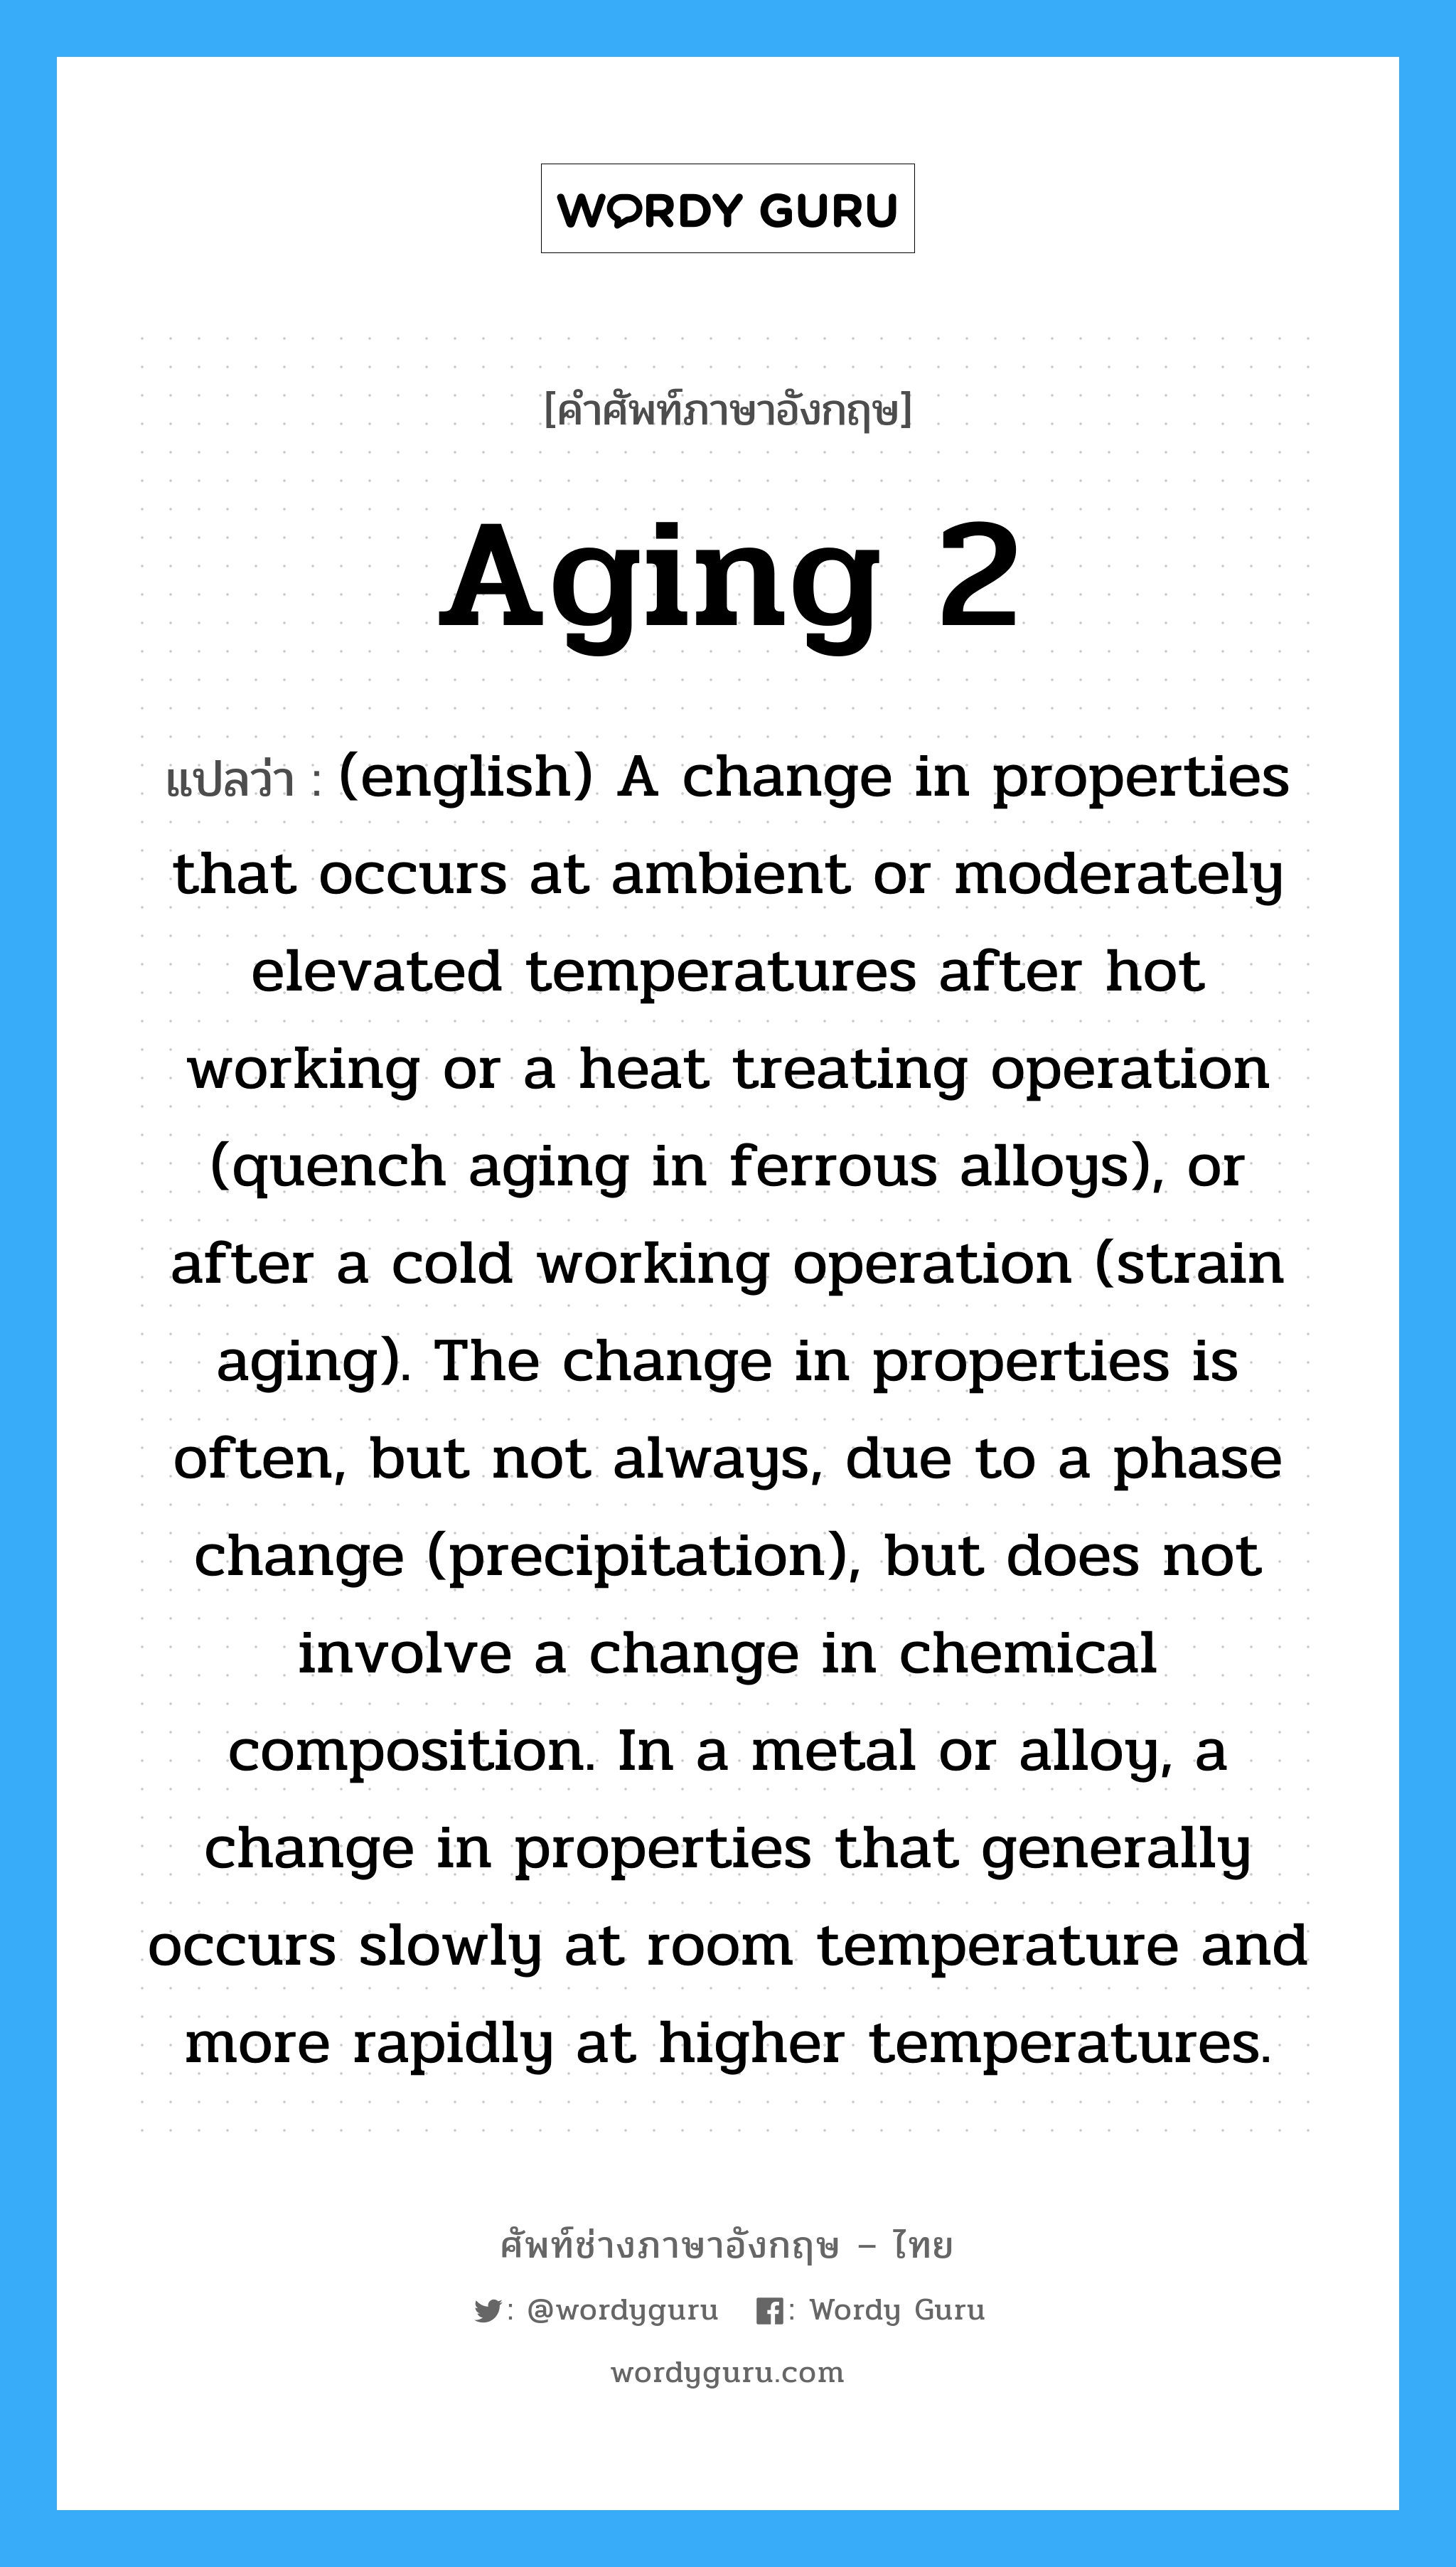 Aging 2 แปลว่า?, คำศัพท์ช่างภาษาอังกฤษ - ไทย Aging 2 คำศัพท์ภาษาอังกฤษ Aging 2 แปลว่า (english) A change in properties that occurs at ambient or moderately elevated temperatures after hot working or a heat treating operation (quench aging in ferrous alloys), or after a cold working operation (strain aging). The change in properties is often, but not always, due to a phase change (precipitation), but does not involve a change in chemical composition. In a metal or alloy, a change in properties that generally occurs slowly at room temperature and more rapidly at higher temperatures.